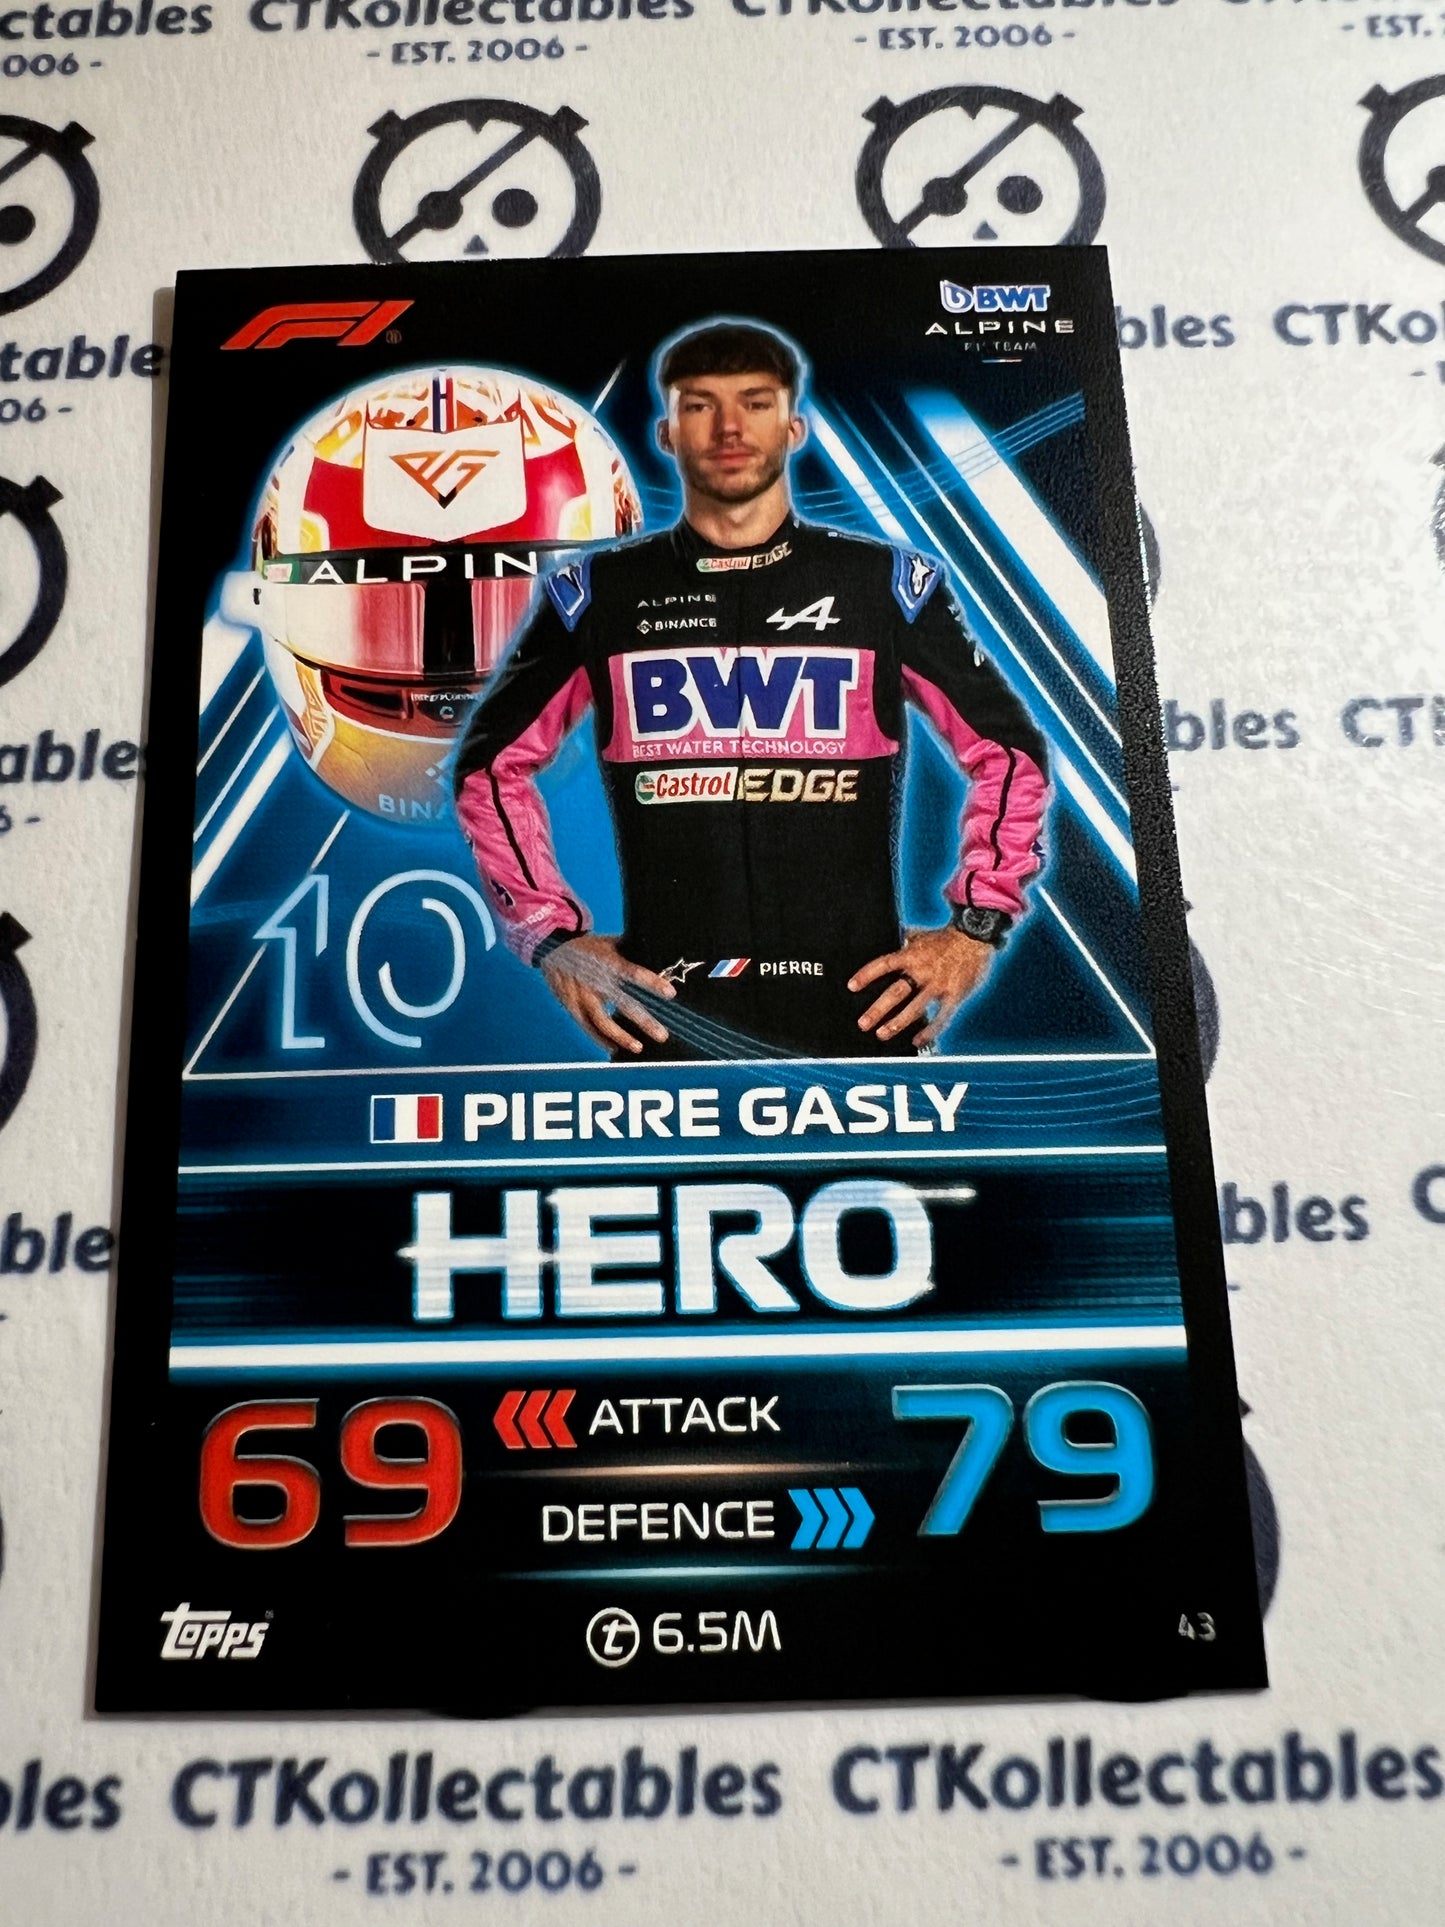 2023 Topps Turbo Attax F1 Base Card - #43 Hero-Pierre Gasly